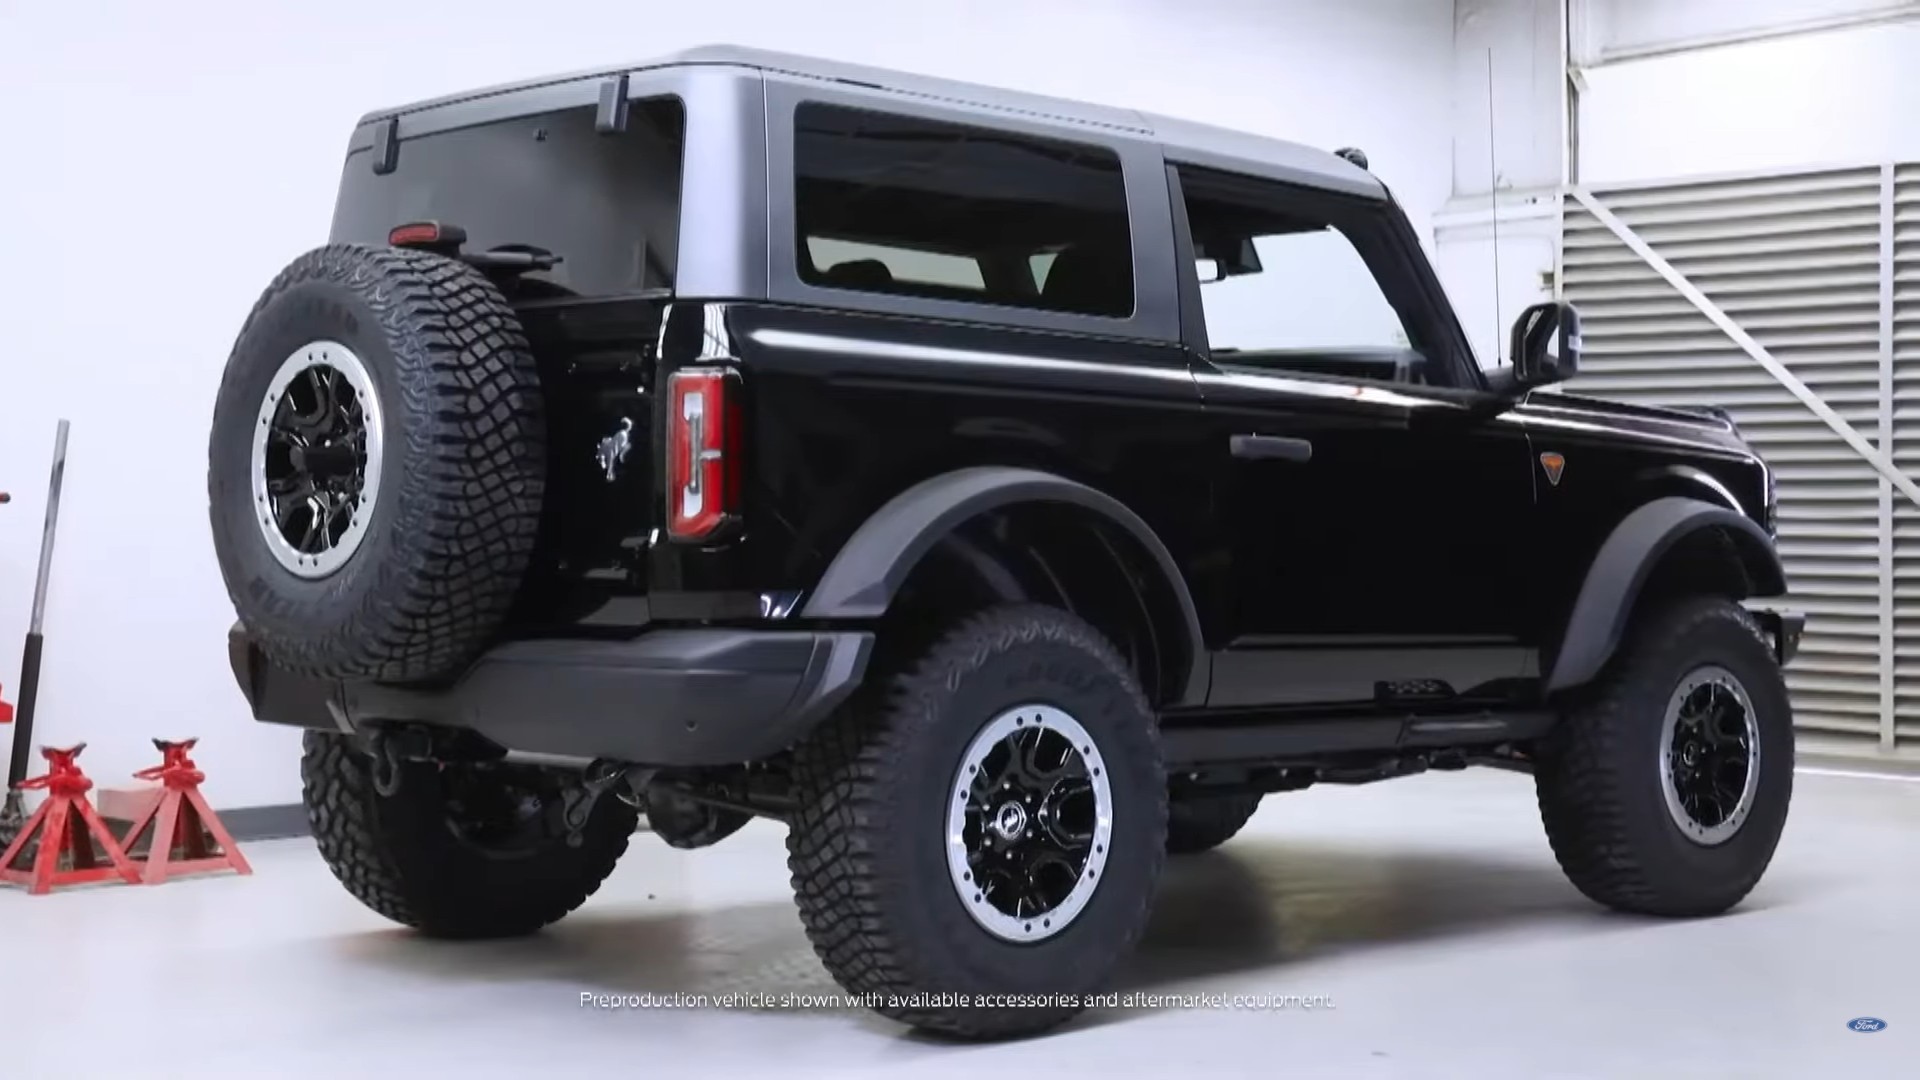 Check Out the SEMA Bronco Badlands Sasquatch 2Door Before and After the Build autoevolution